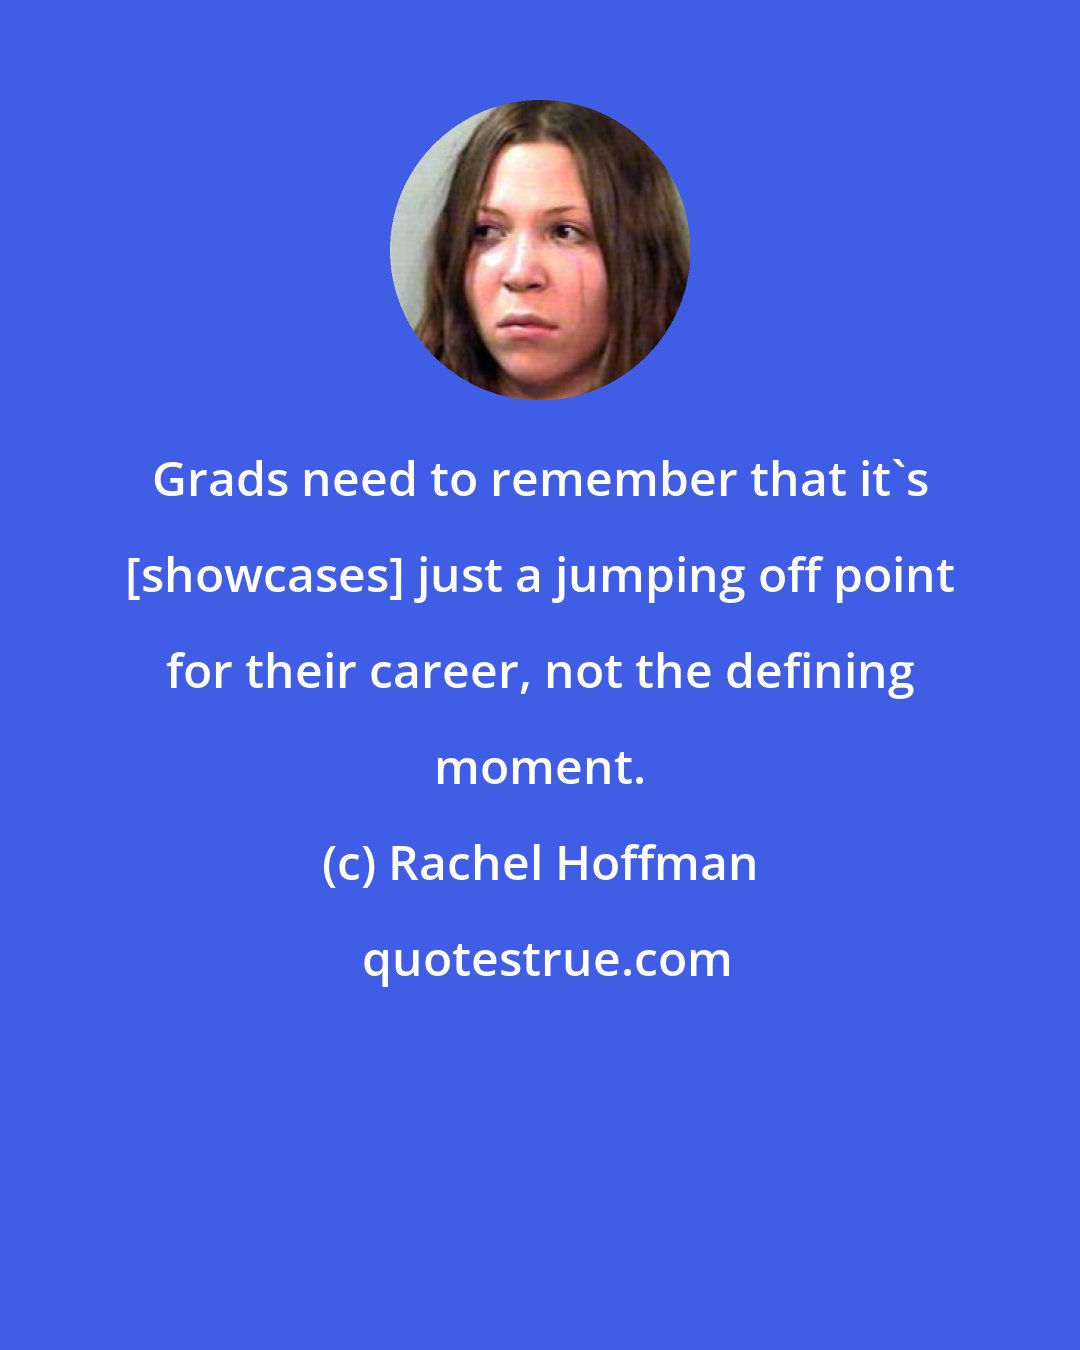 Rachel Hoffman: Grads need to remember that it's [showcases] just a jumping off point for their career, not the defining moment.